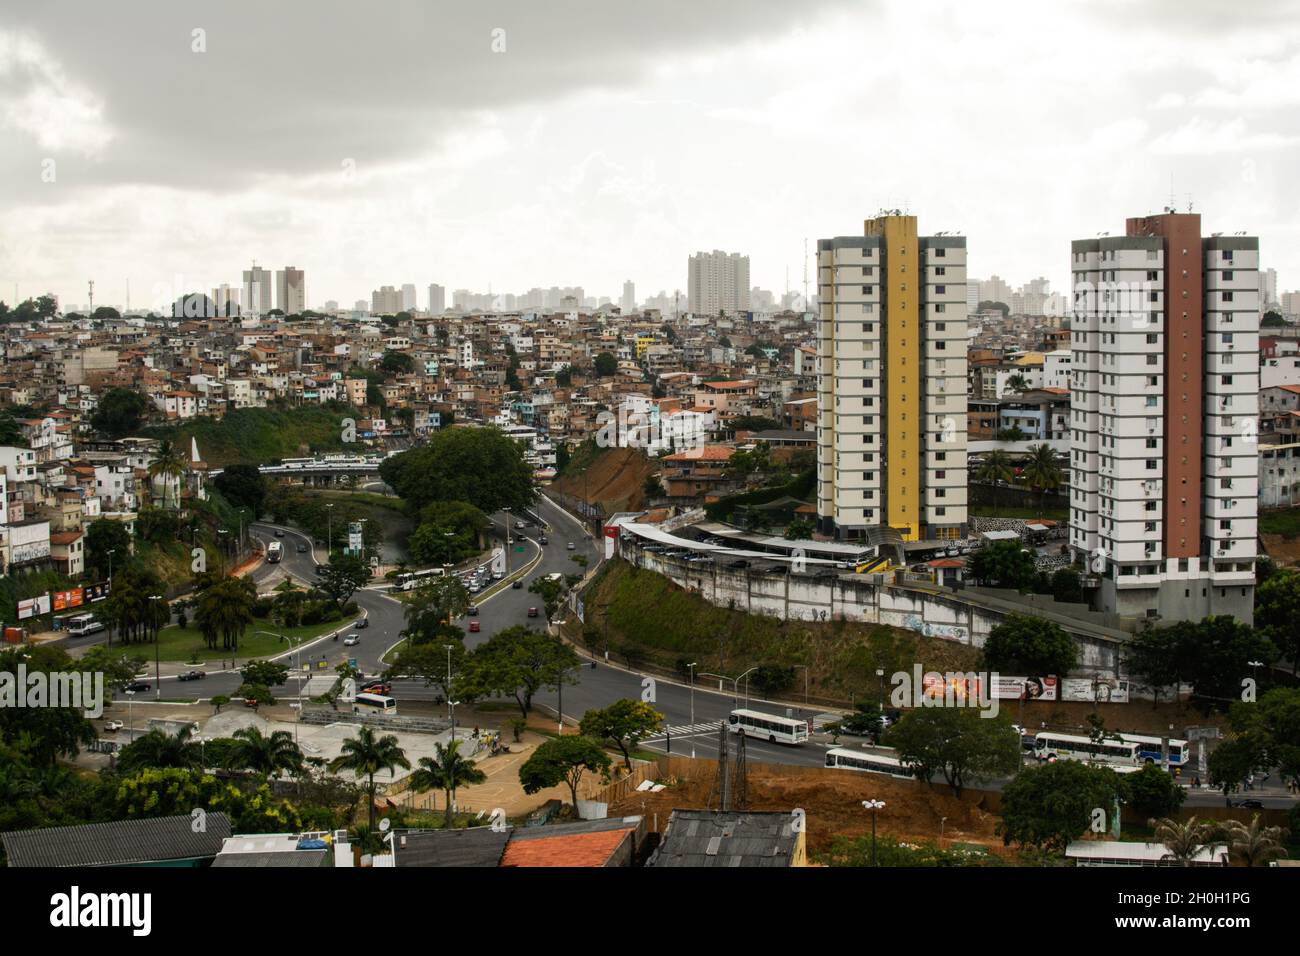 Salvador, Bahia, Brazil - March 22, 2014: View of the buildings and popular houses built in the mountains. City of Salvador, Bahia, Brazil. Stock Photo